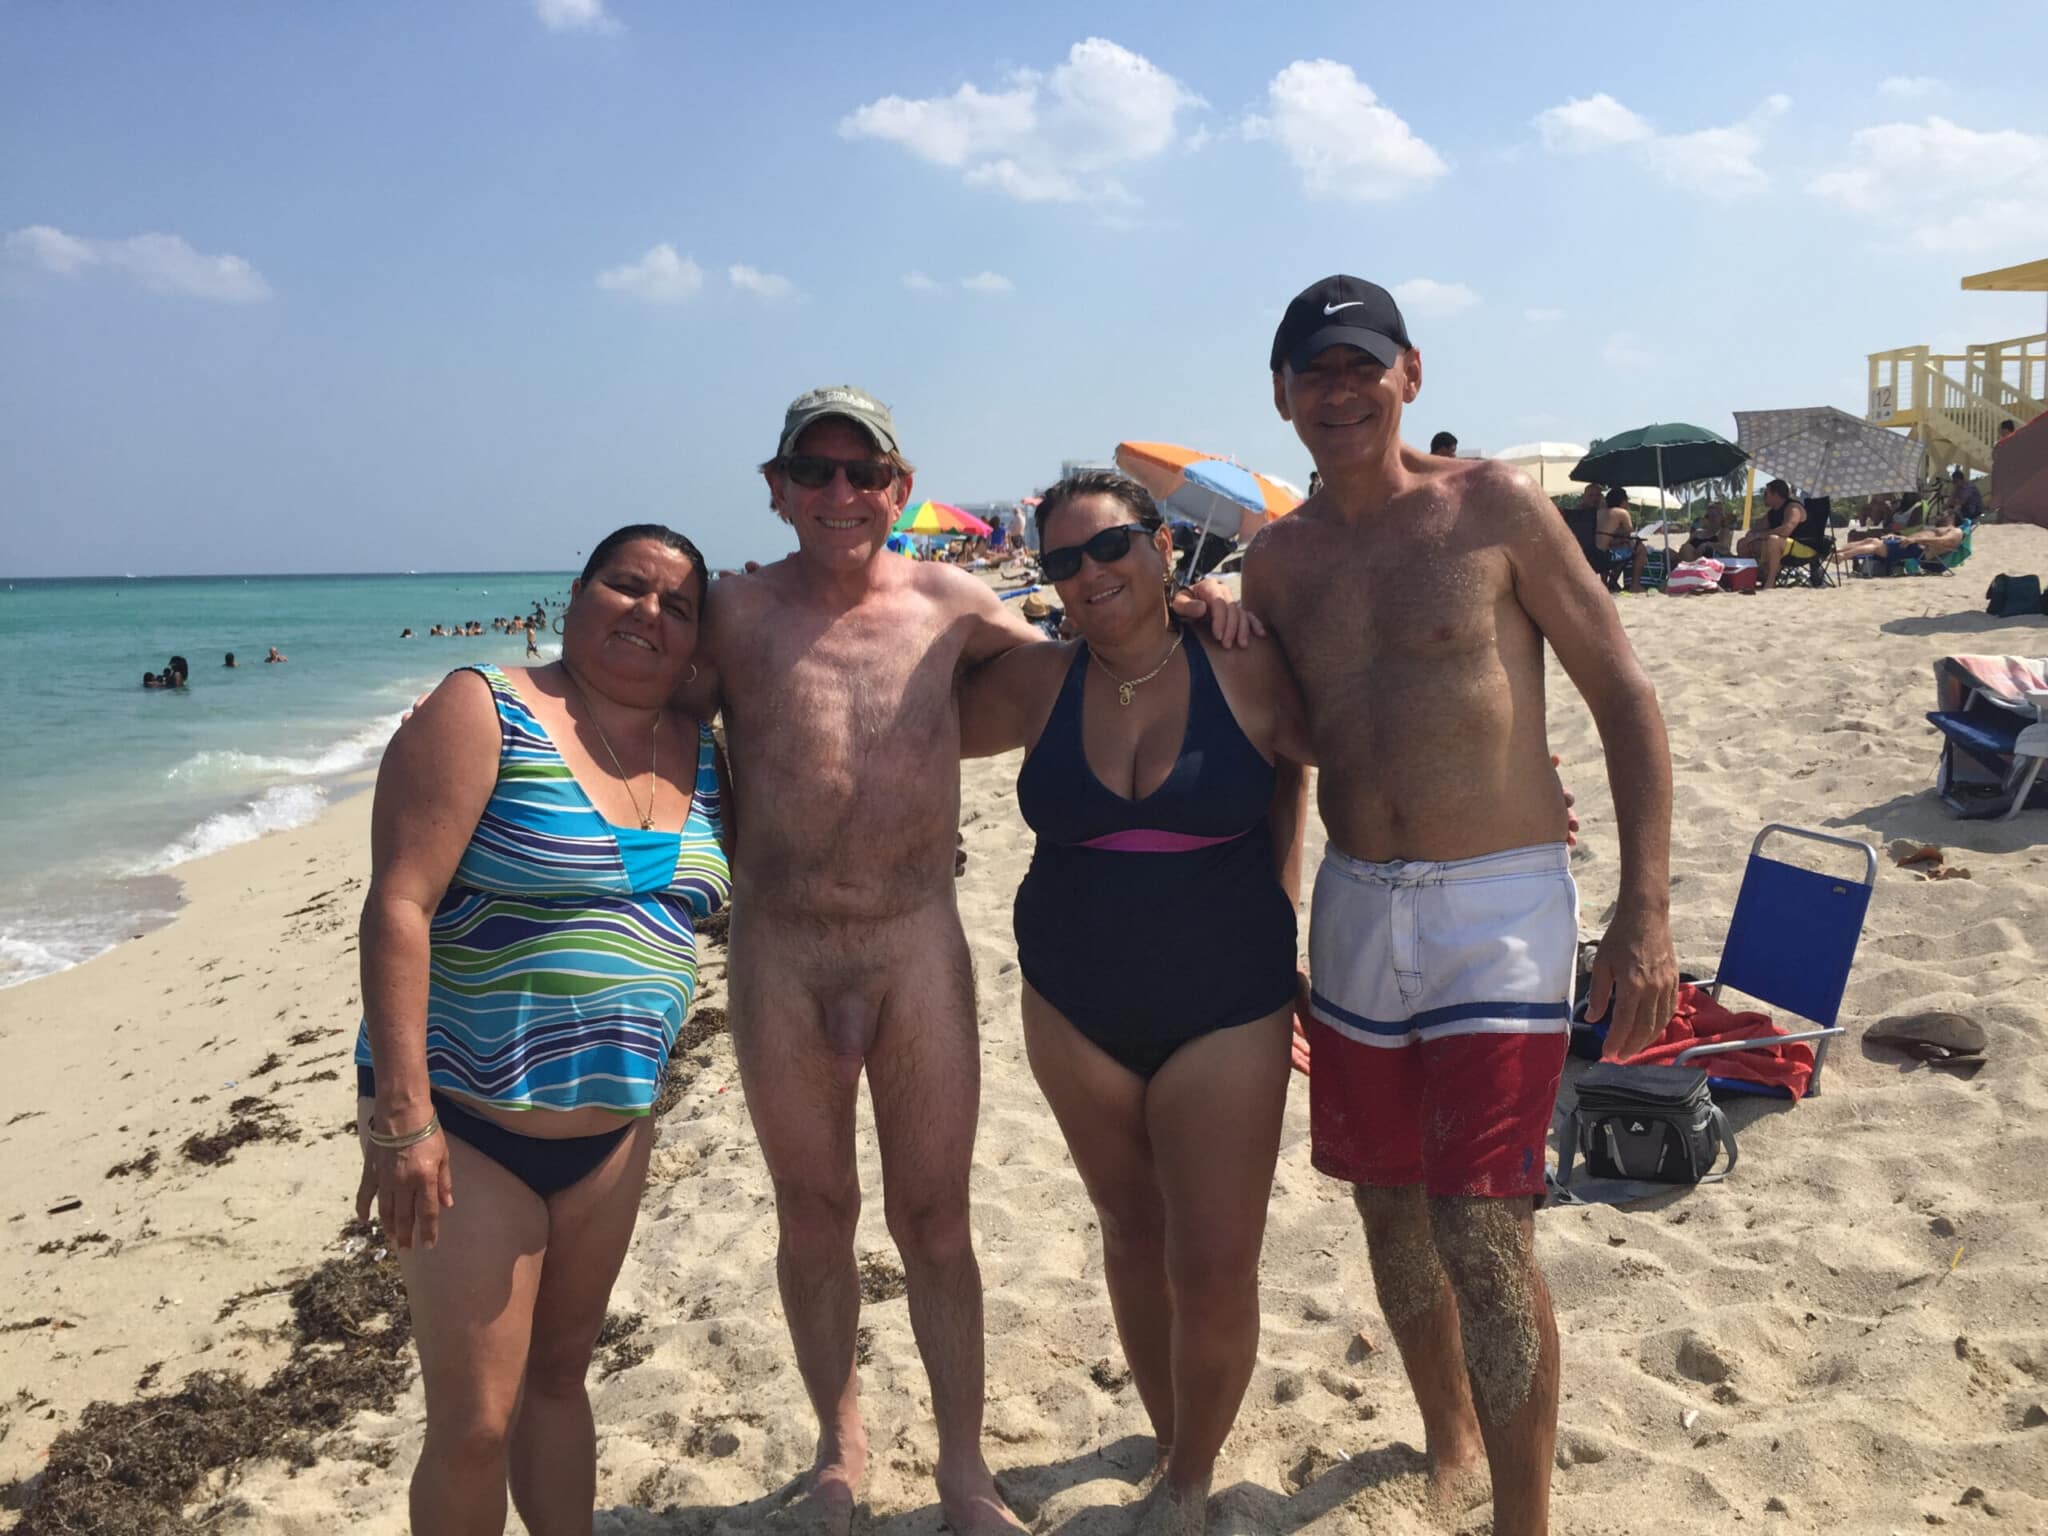 Cuban Tourist Dick Flash Pics, Nude Beach Pics, Public Nudity Pics, Real Amateurs from Google, Tumblr, Pinterest, Facebook, Twitter, Instagram and Snapchat. image